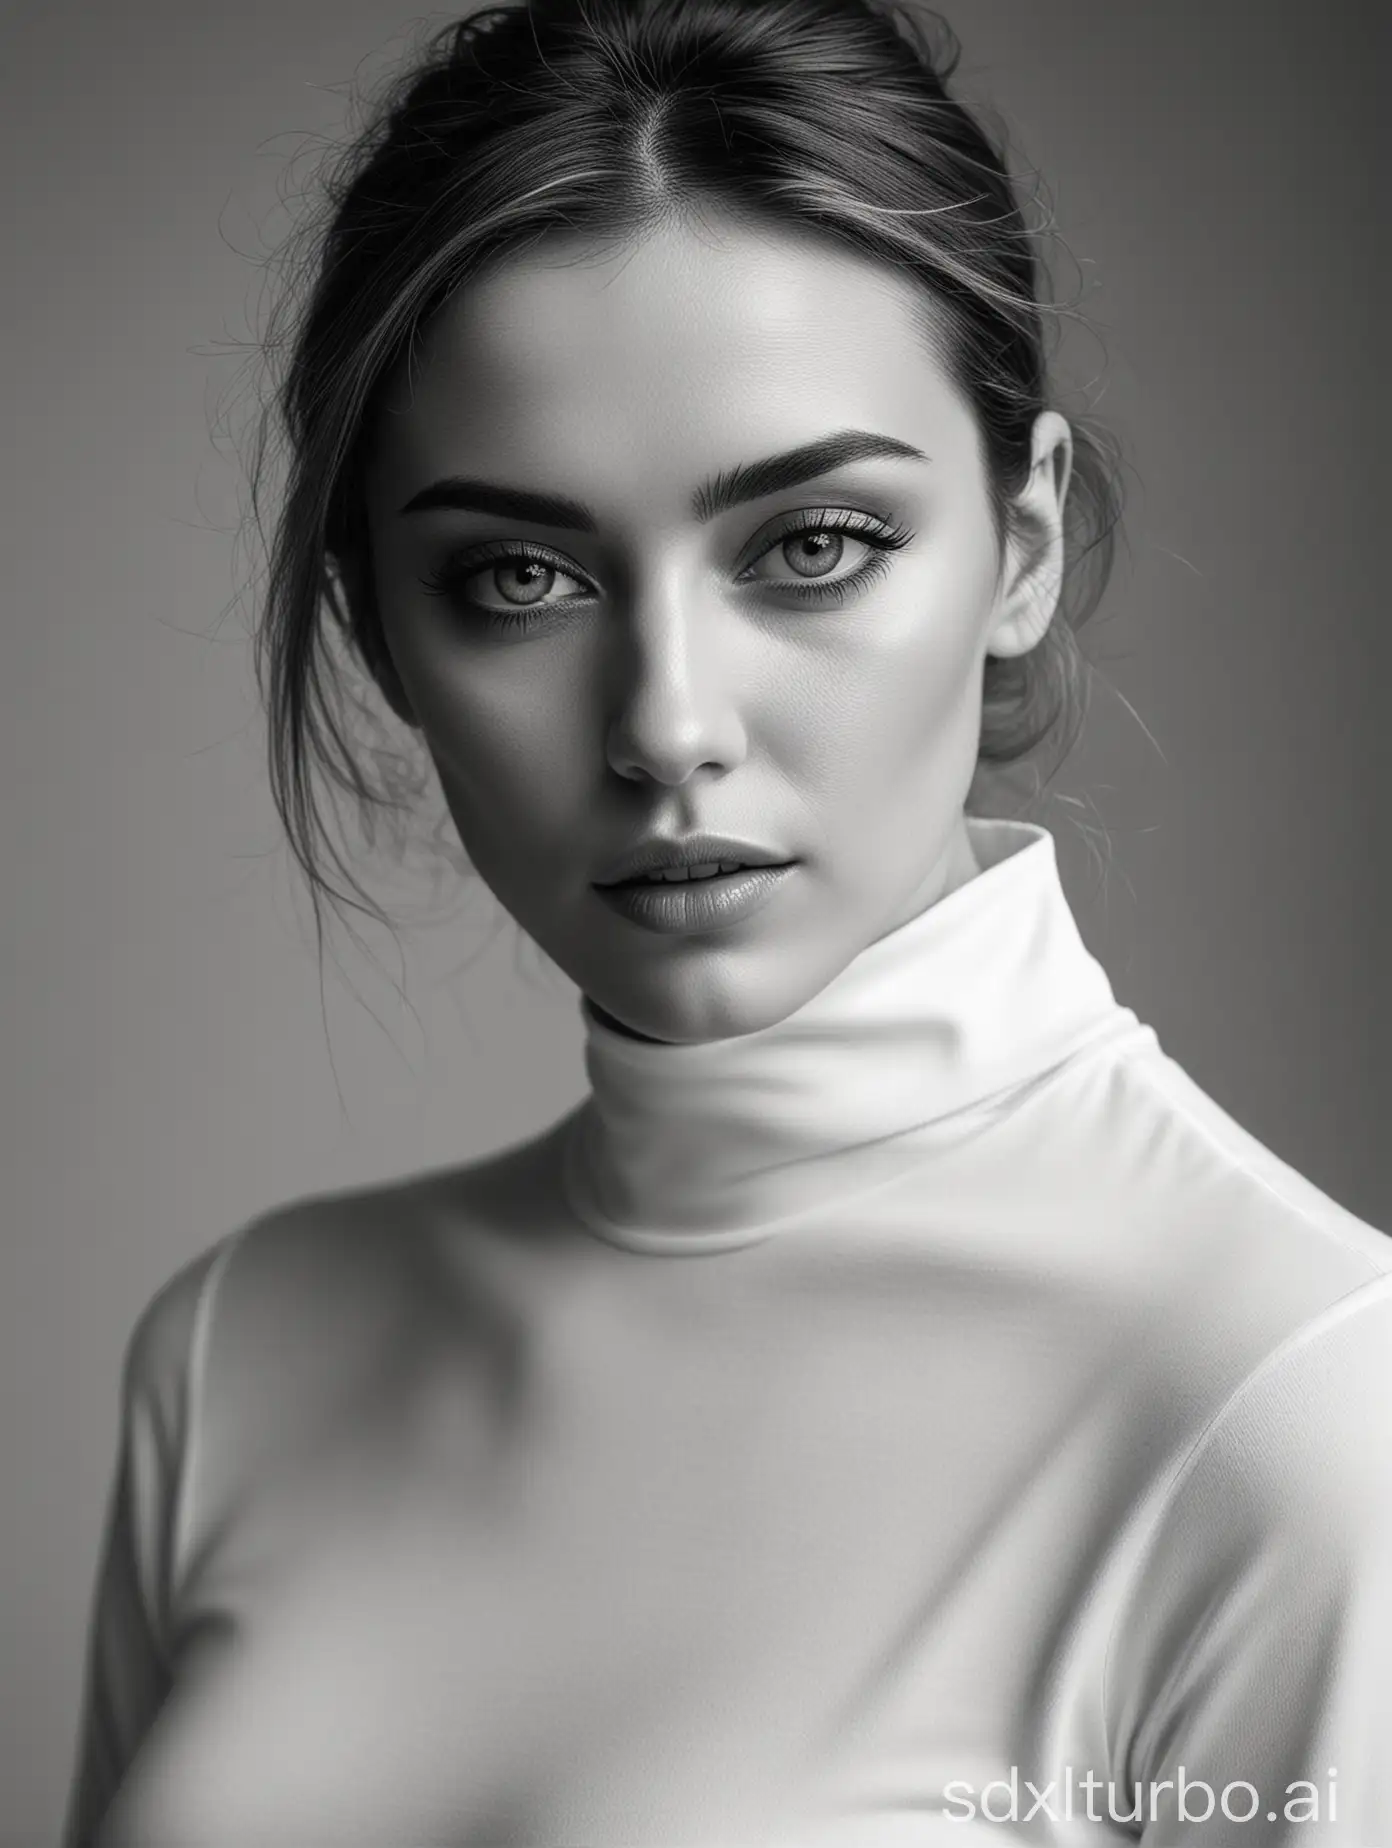 fashion photography, black and white, woman in minimalistic long sleeve top, monochromatic colors, high contrast, high resolution, hyperrealism, high detail, shot on Sony Alpha A7 III, focus on the eyes